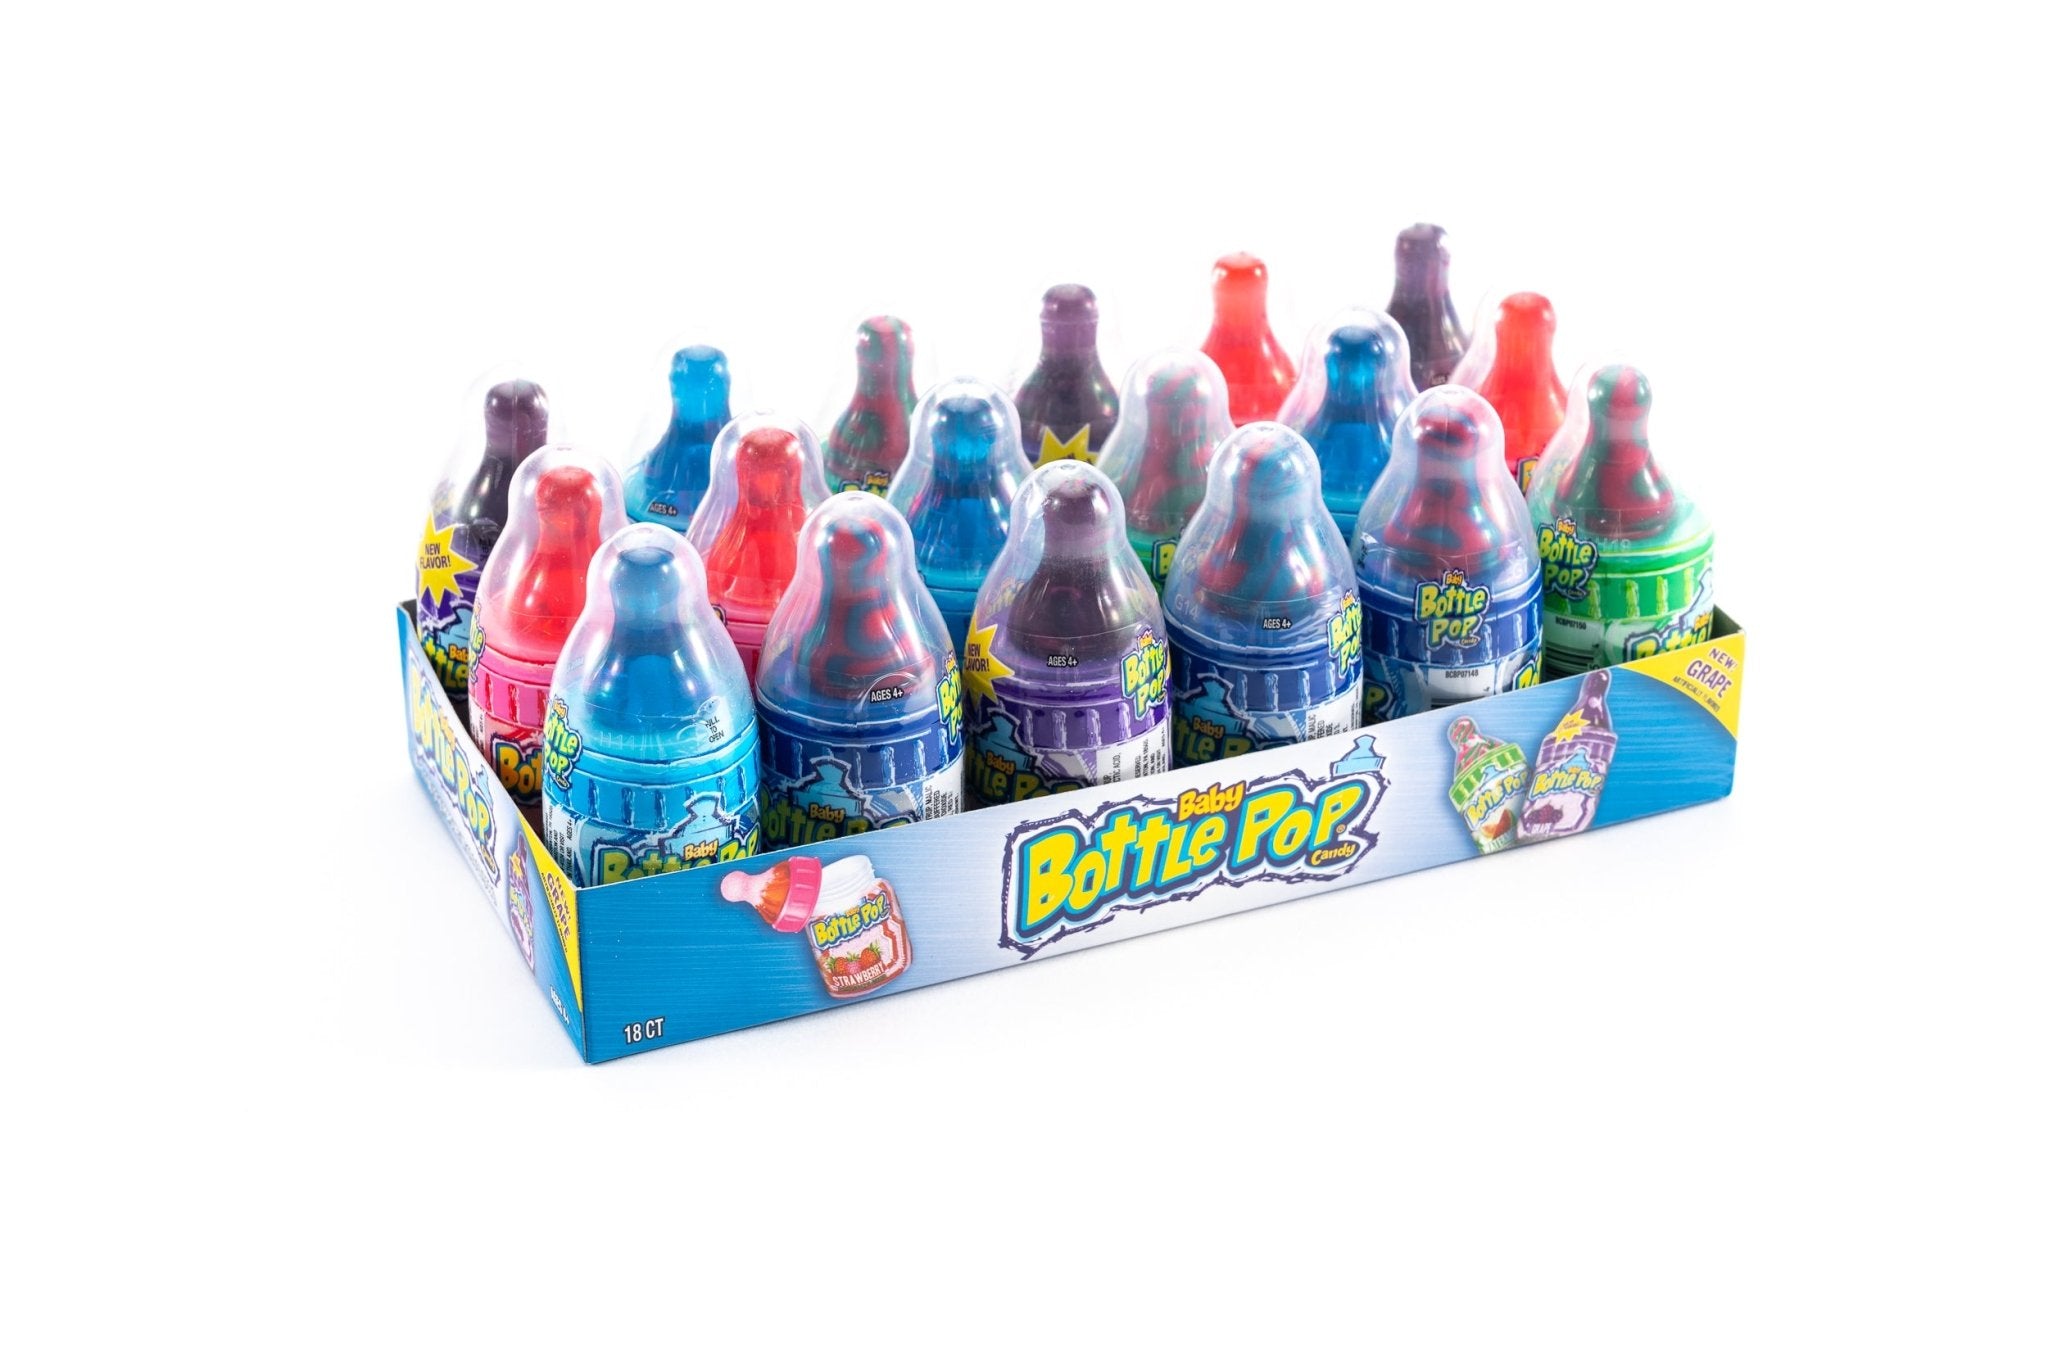 Baby Bottle Pop Candy Variety Pack (1.1 oz, 18 ct.) - Vintage Candy Co.